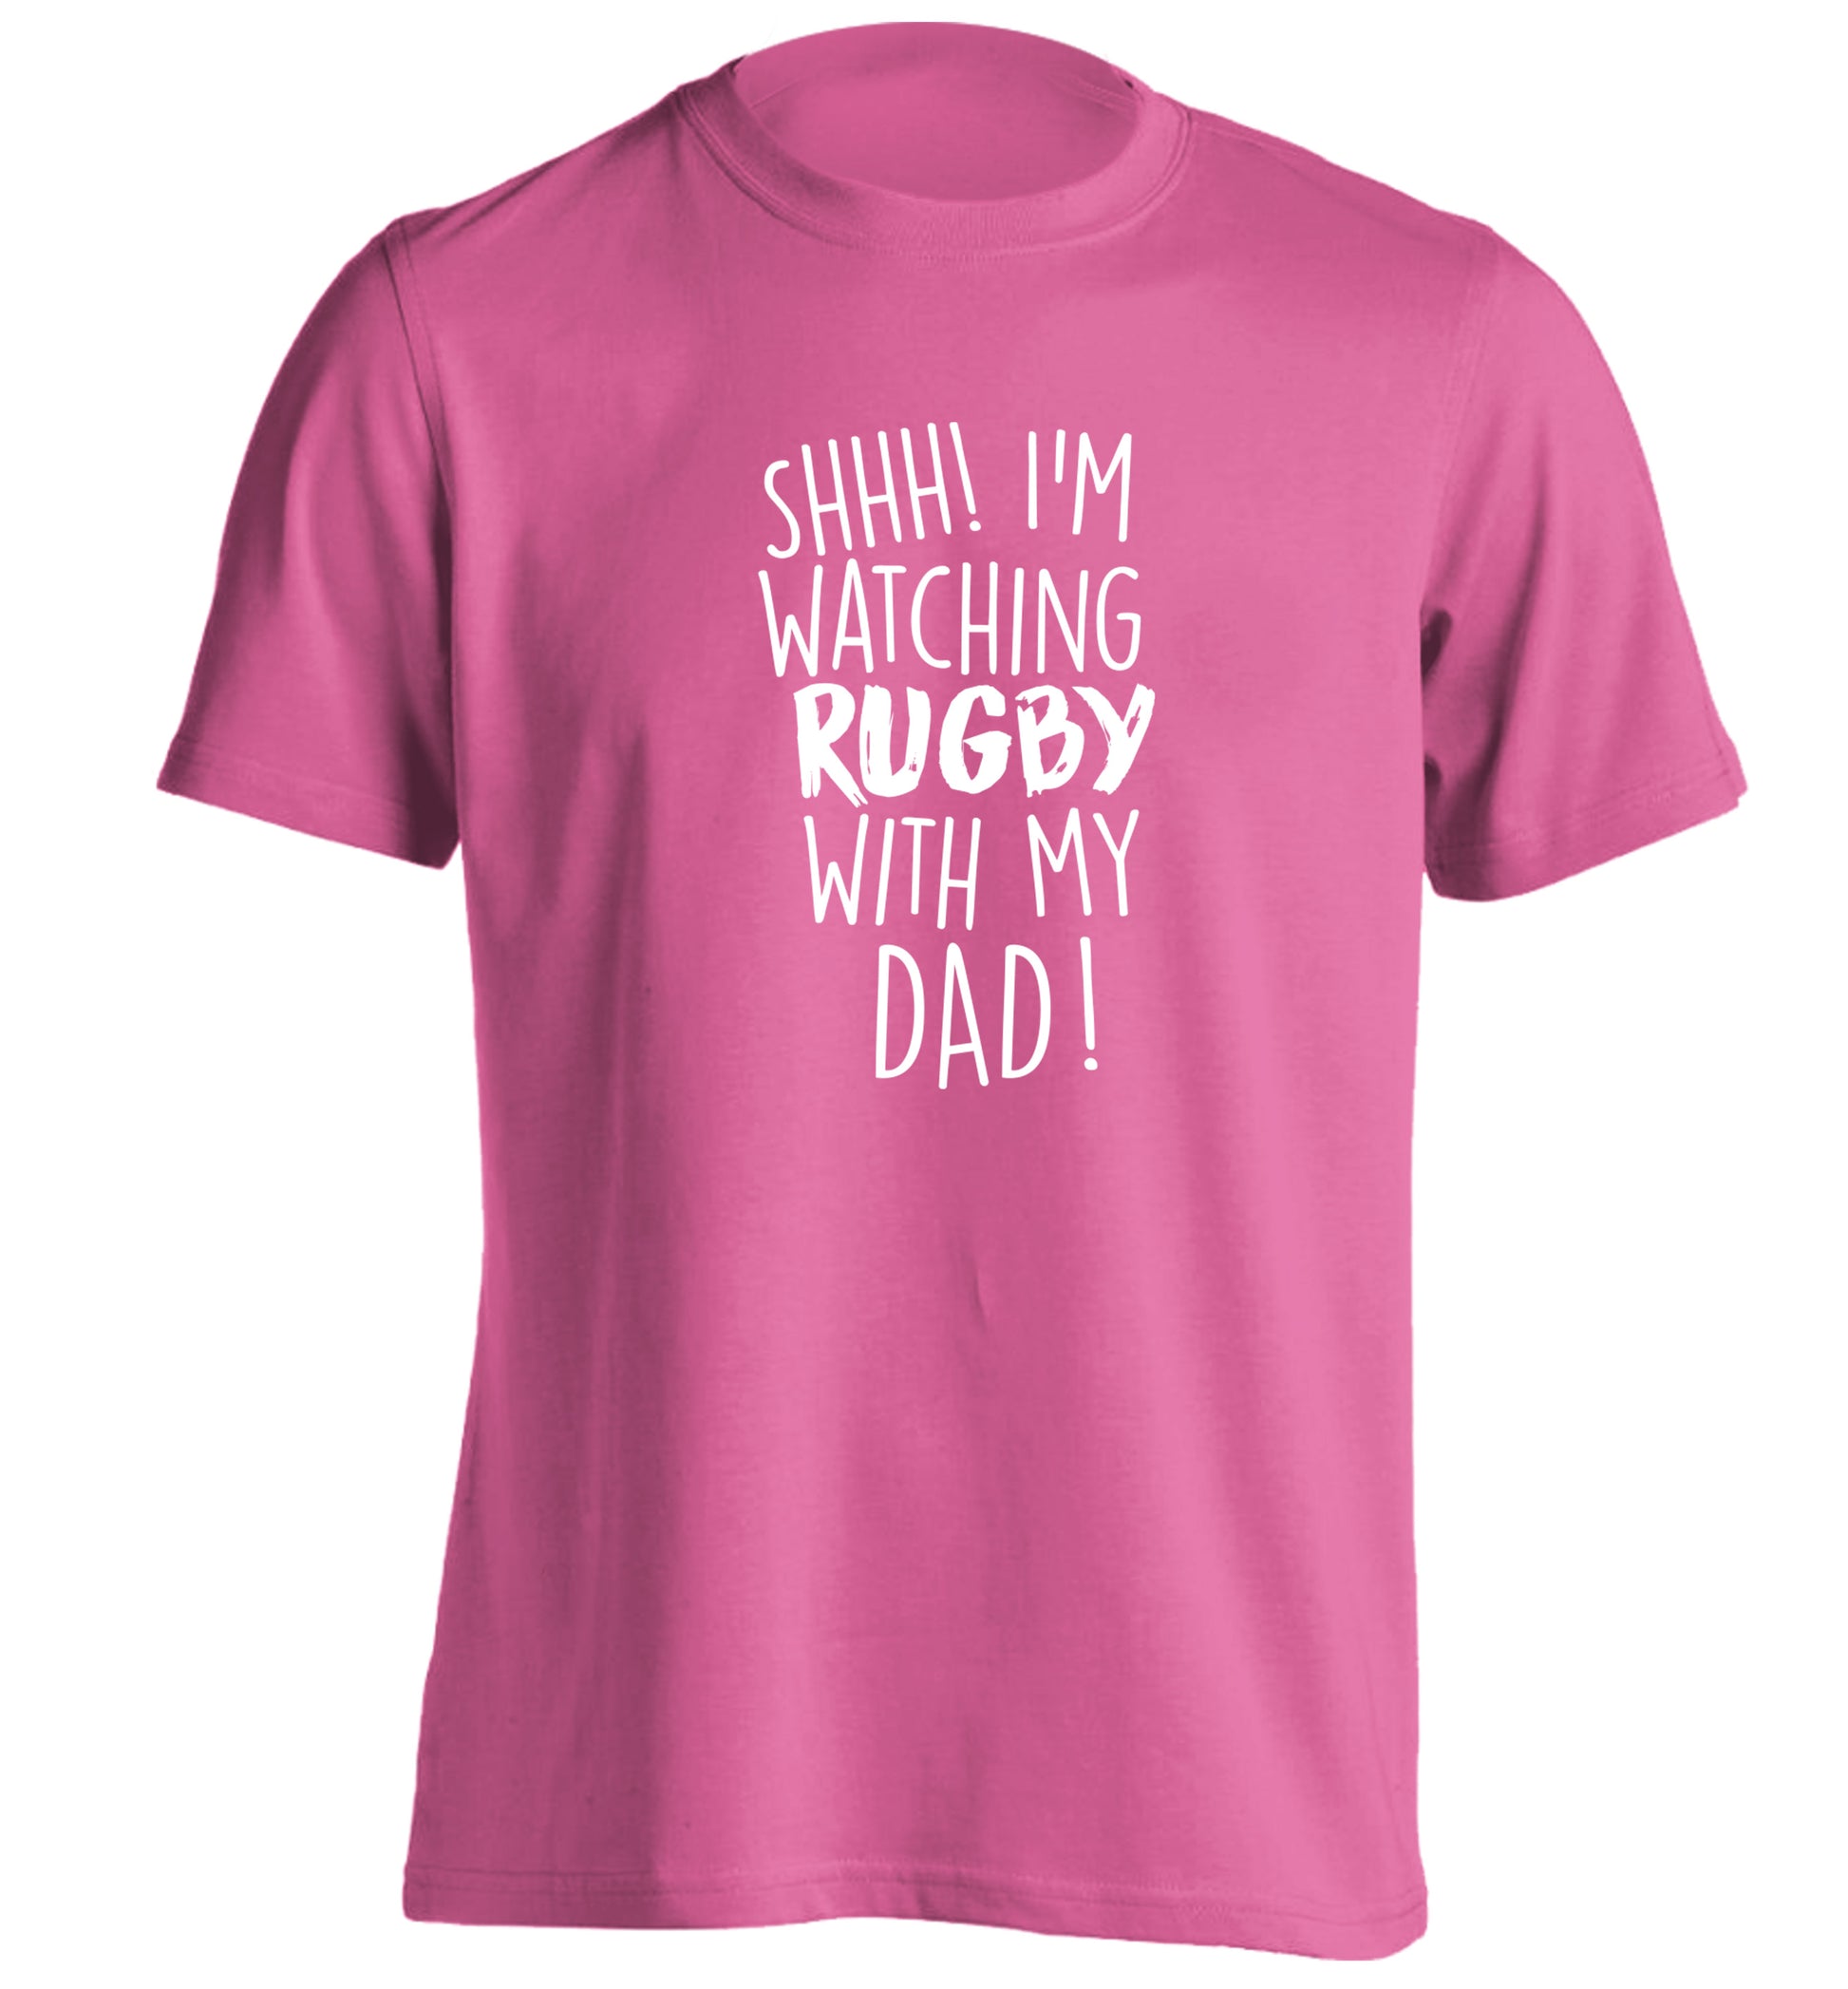 Shh... I'm watching rugby with my dad adults unisex pink Tshirt 2XL